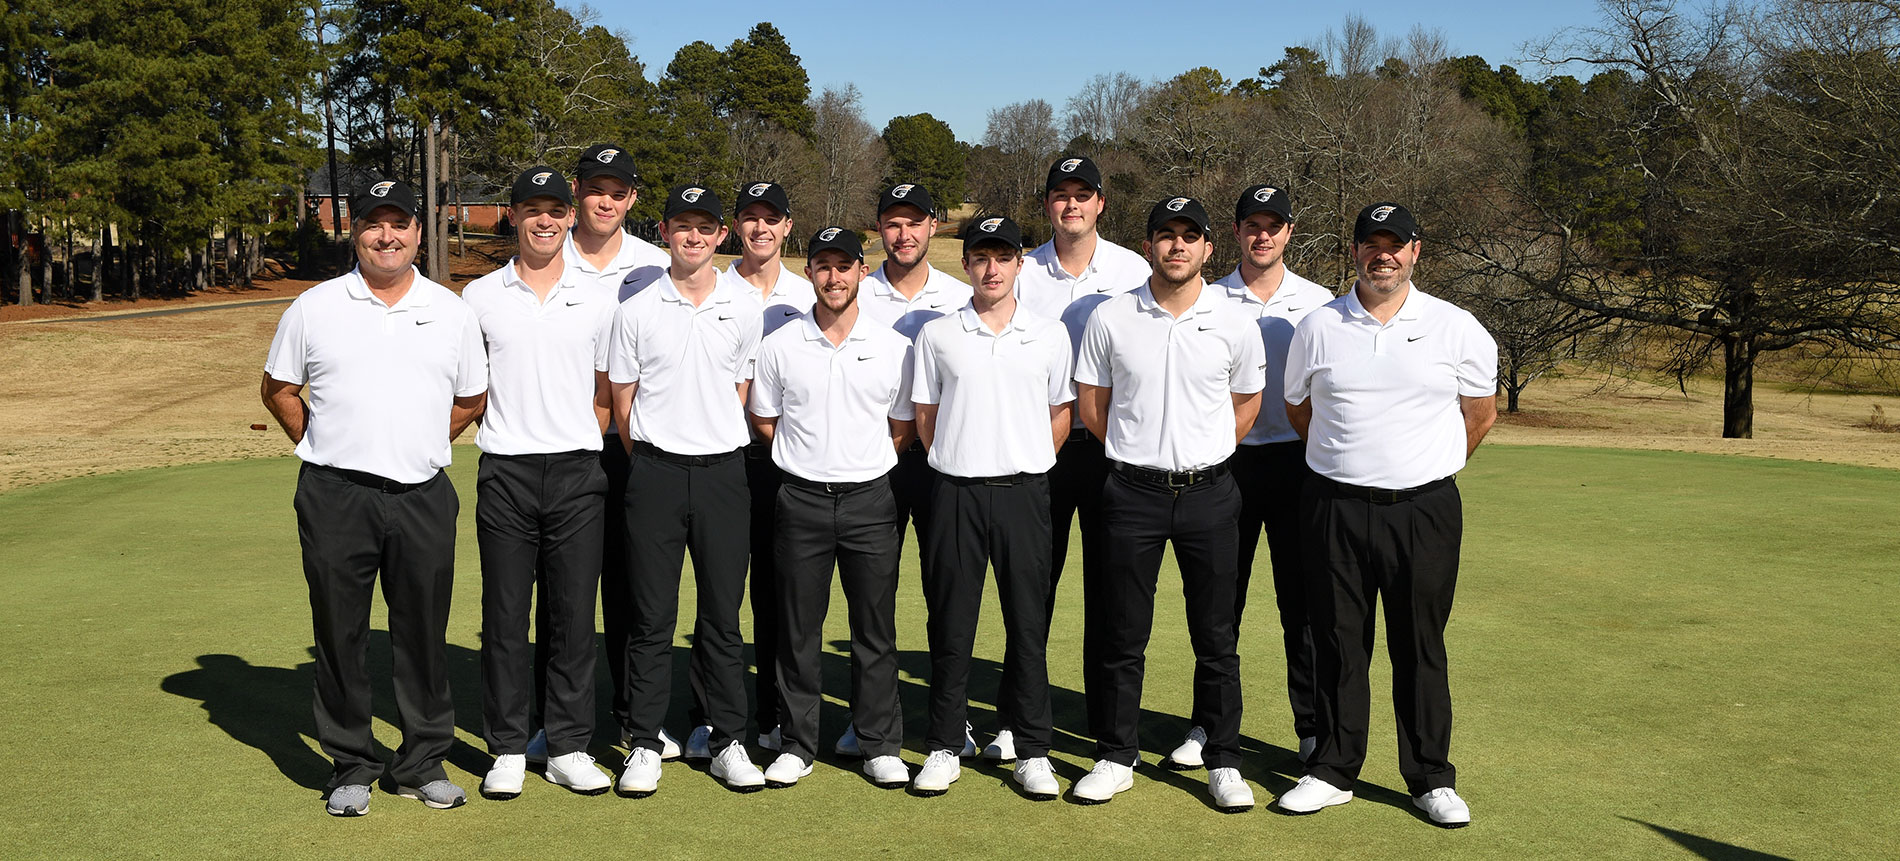 Men’s Golf Moves up Two Spots – Finishes Tied for Third at LMU’s Spring Kick-off Intercollegiate